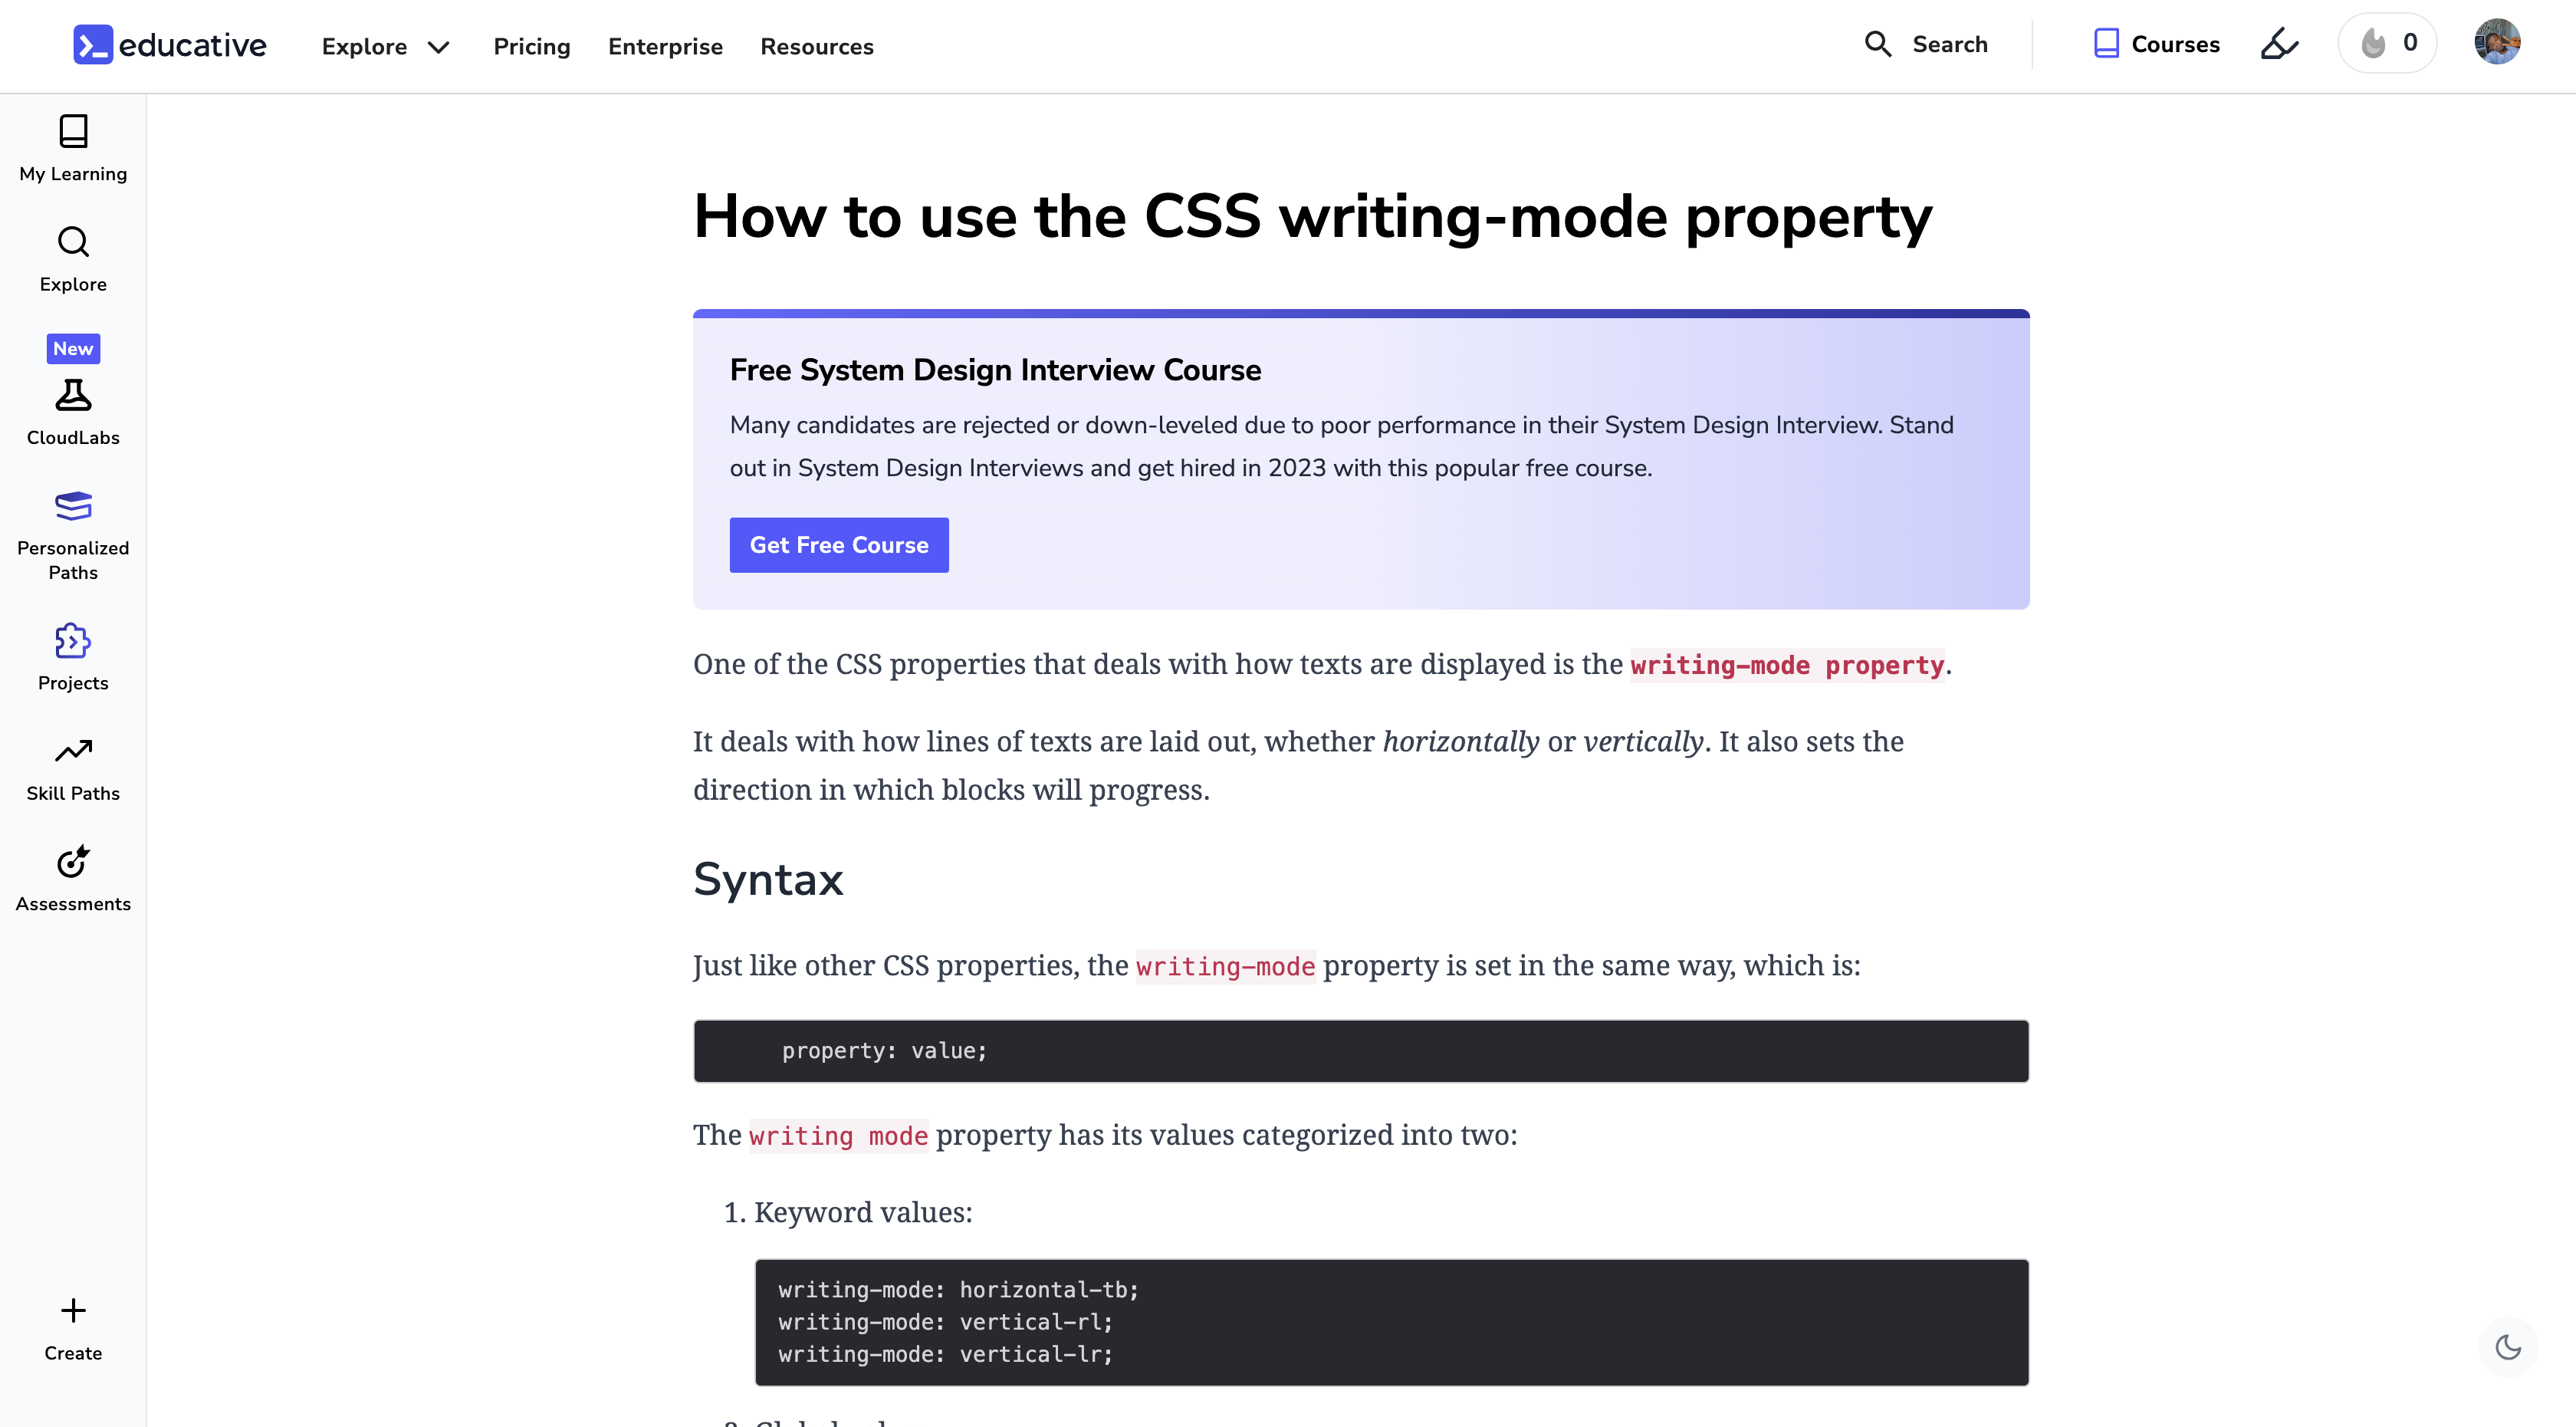 How to use the CSS writing-mode property